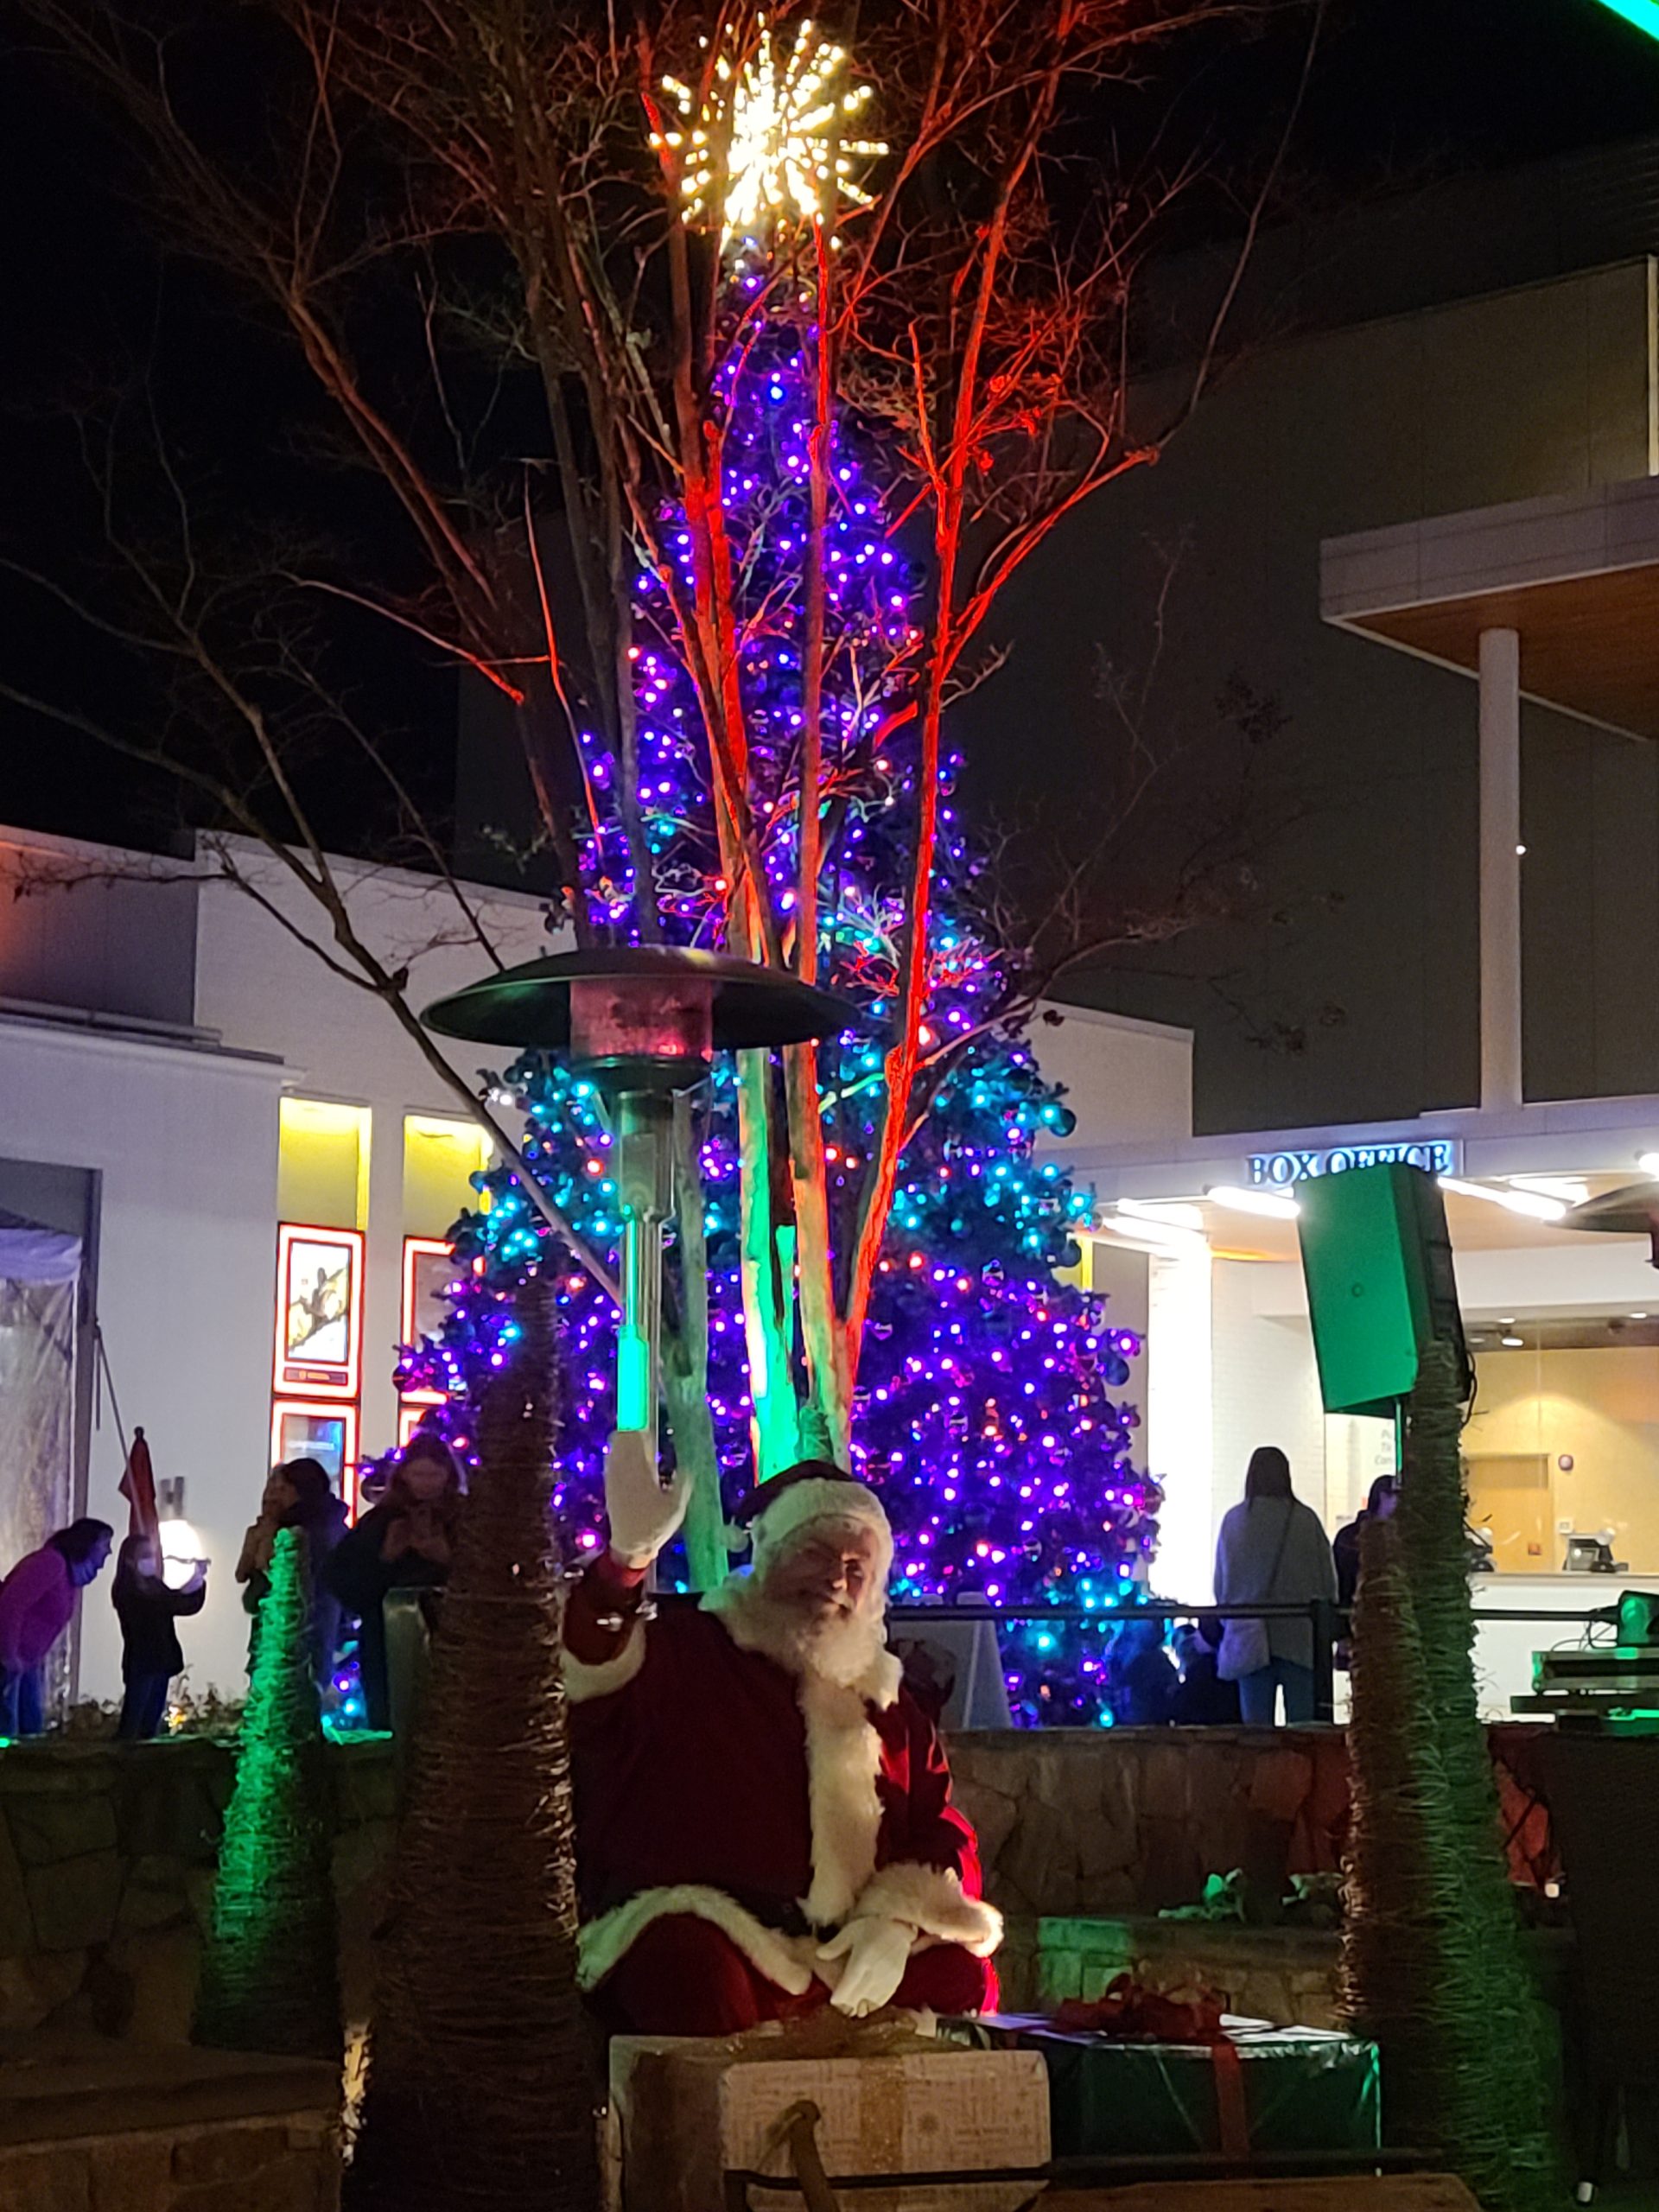 Santa Claus poses in front of a large Christmas Tree lit with red, blue and green lights, with a white star on top